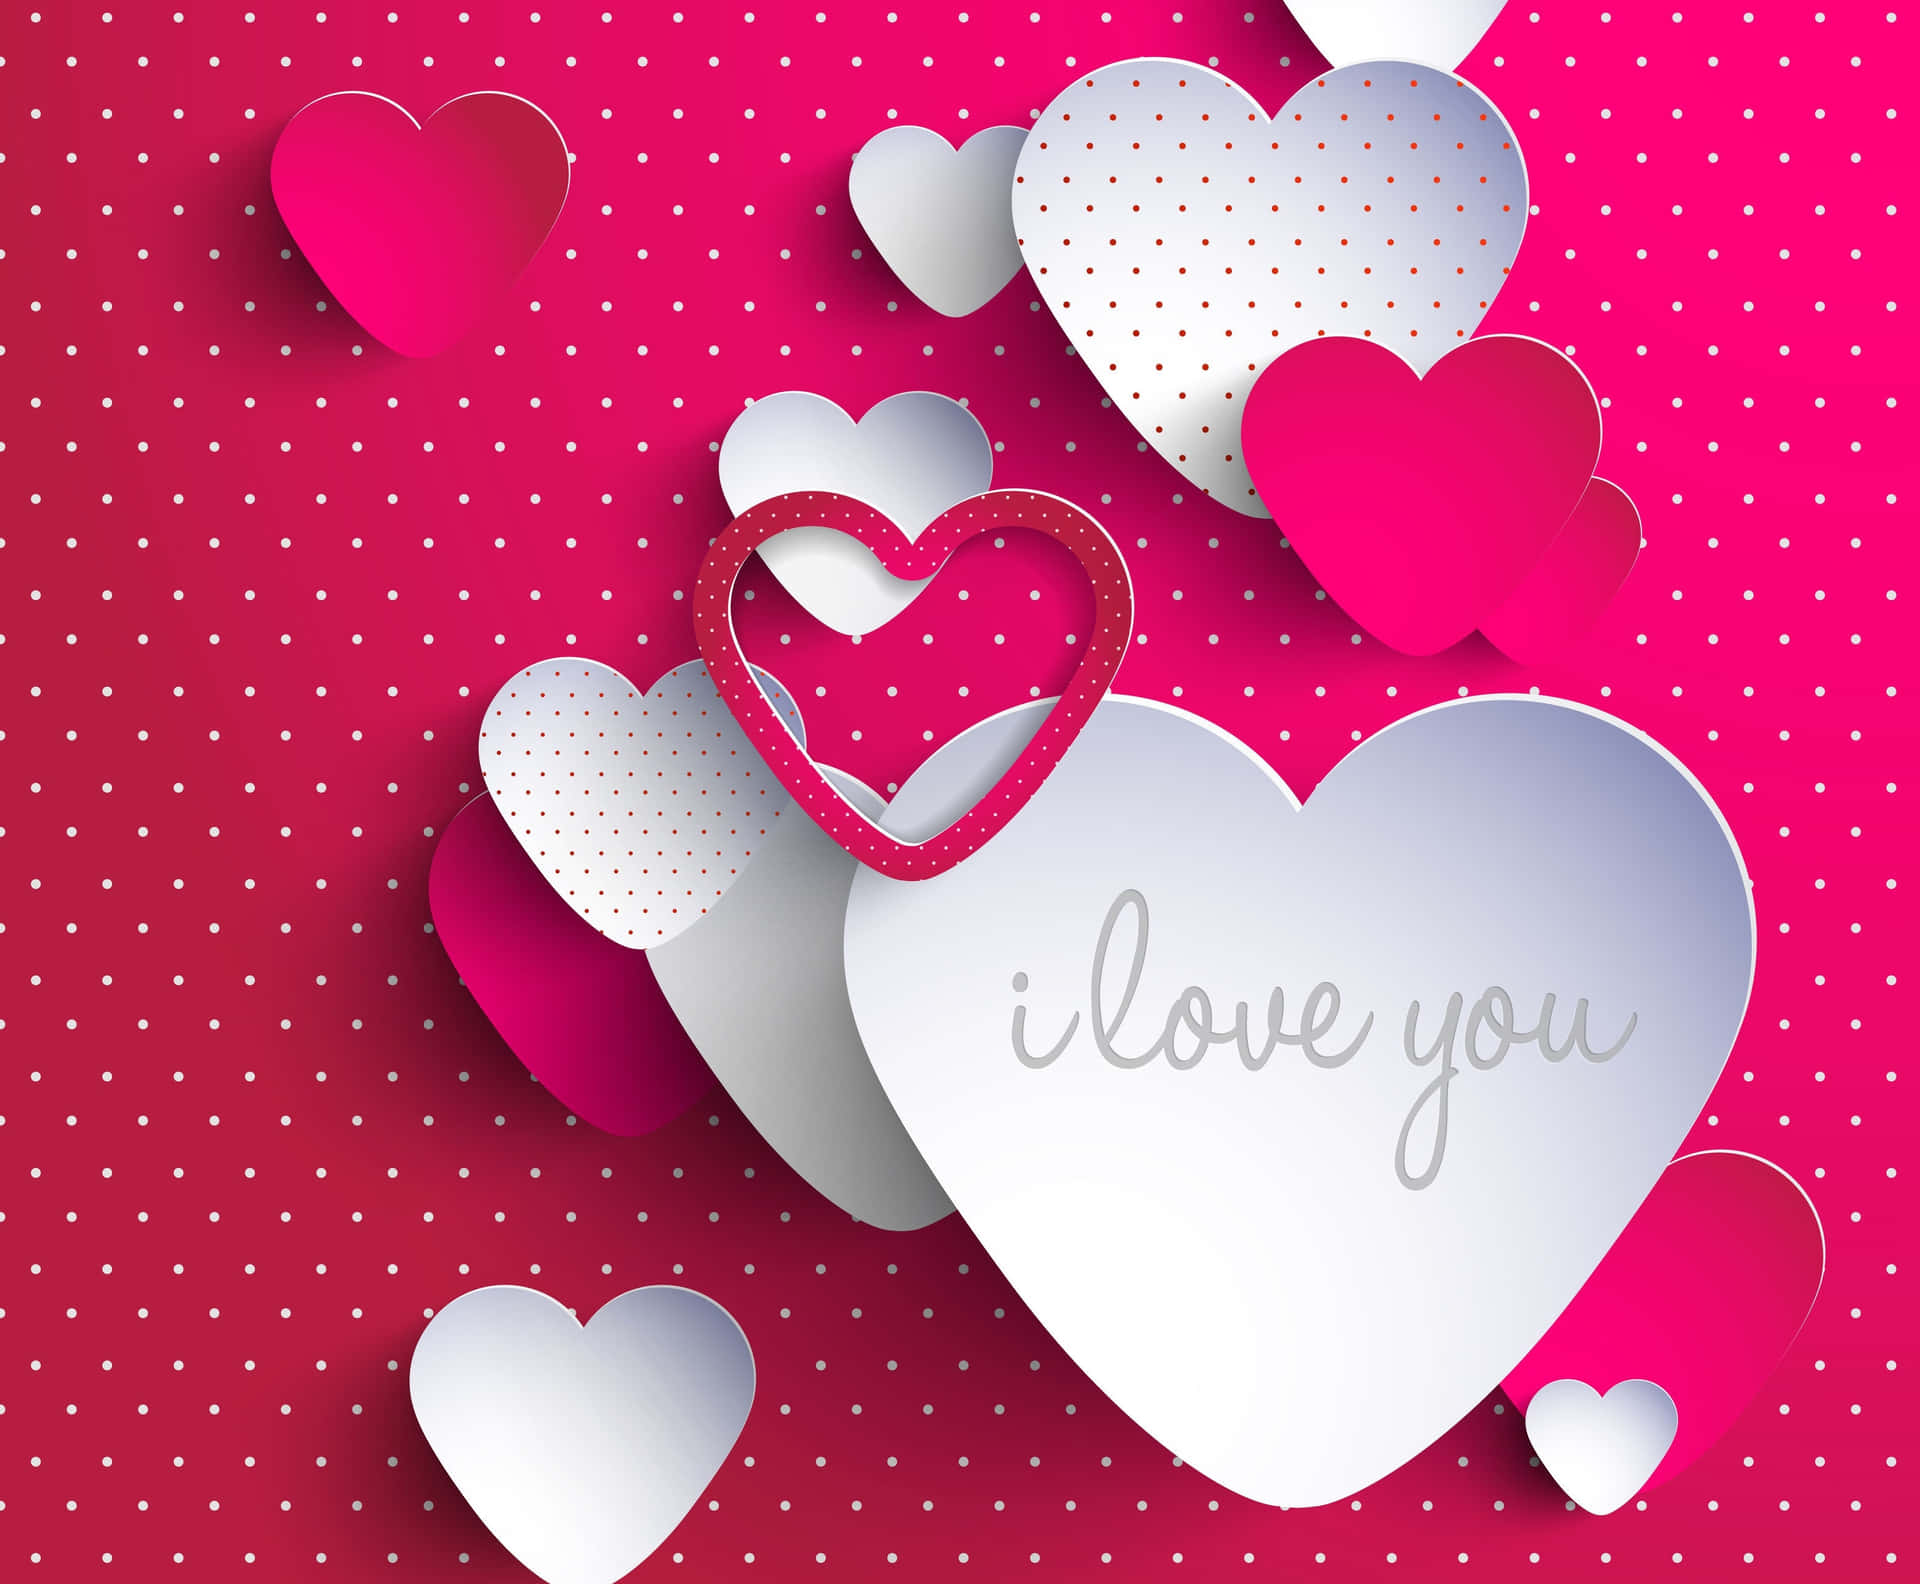 i love you hearts images